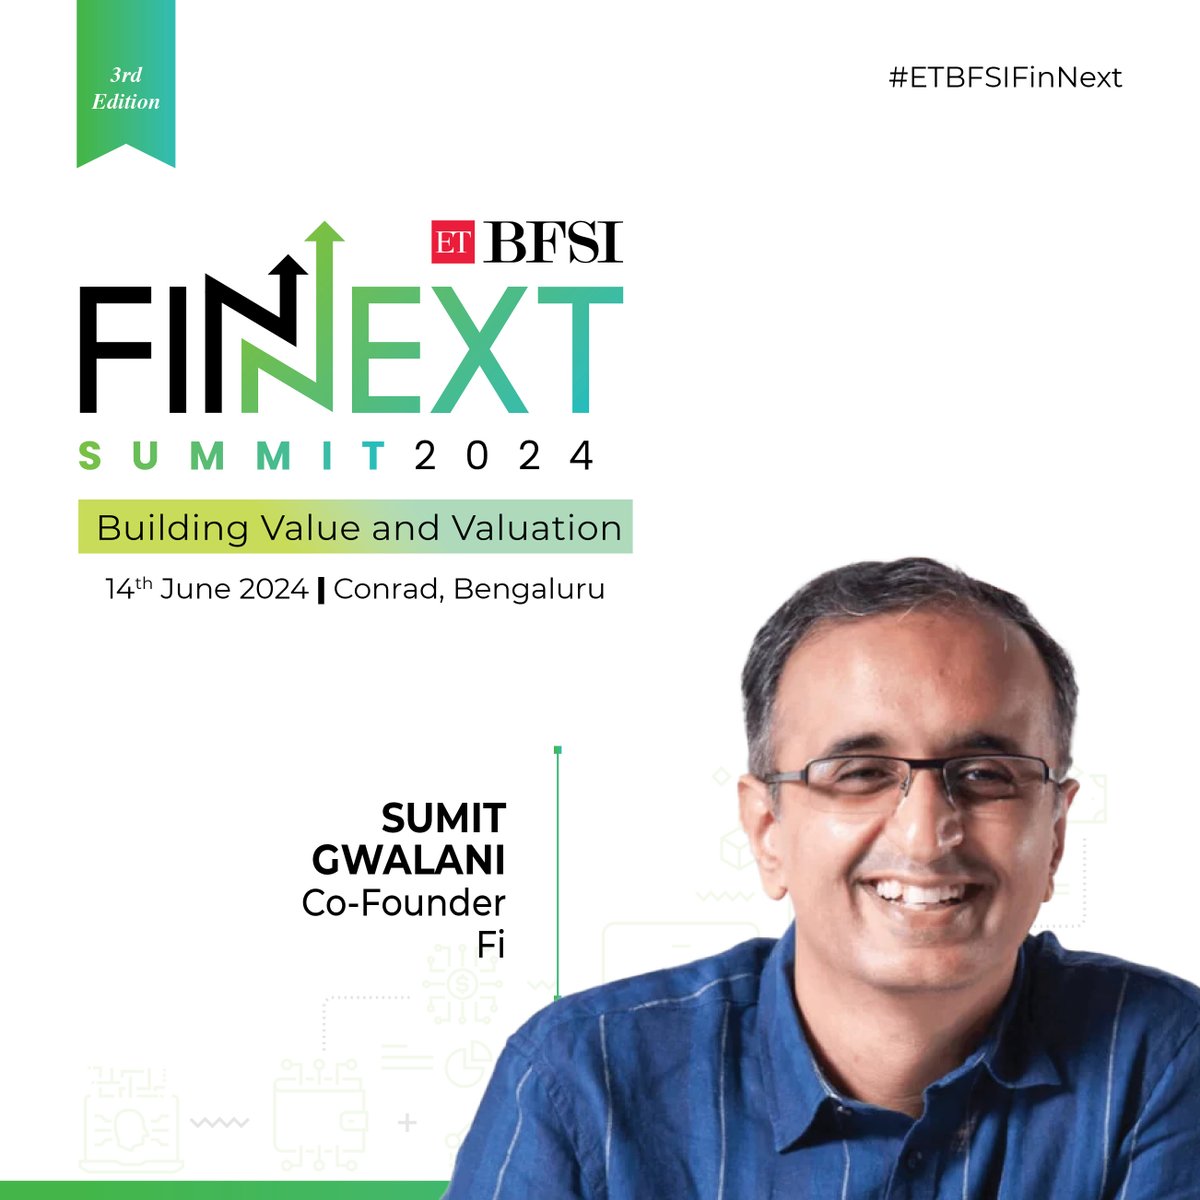 Thrilled to welcome @Sumitpgwalani, Co-Founder of Fi, to the spotlight at ETBFSI Finnext Summit in Bengaluru! 🚀 

Get ready for an insightful session that will inspire change! 💼

Know more- bit.ly/4a85nEd

#ETBFSI #ETBFSIFINNEXT #FINNEXT #Fintech #DigitalLending